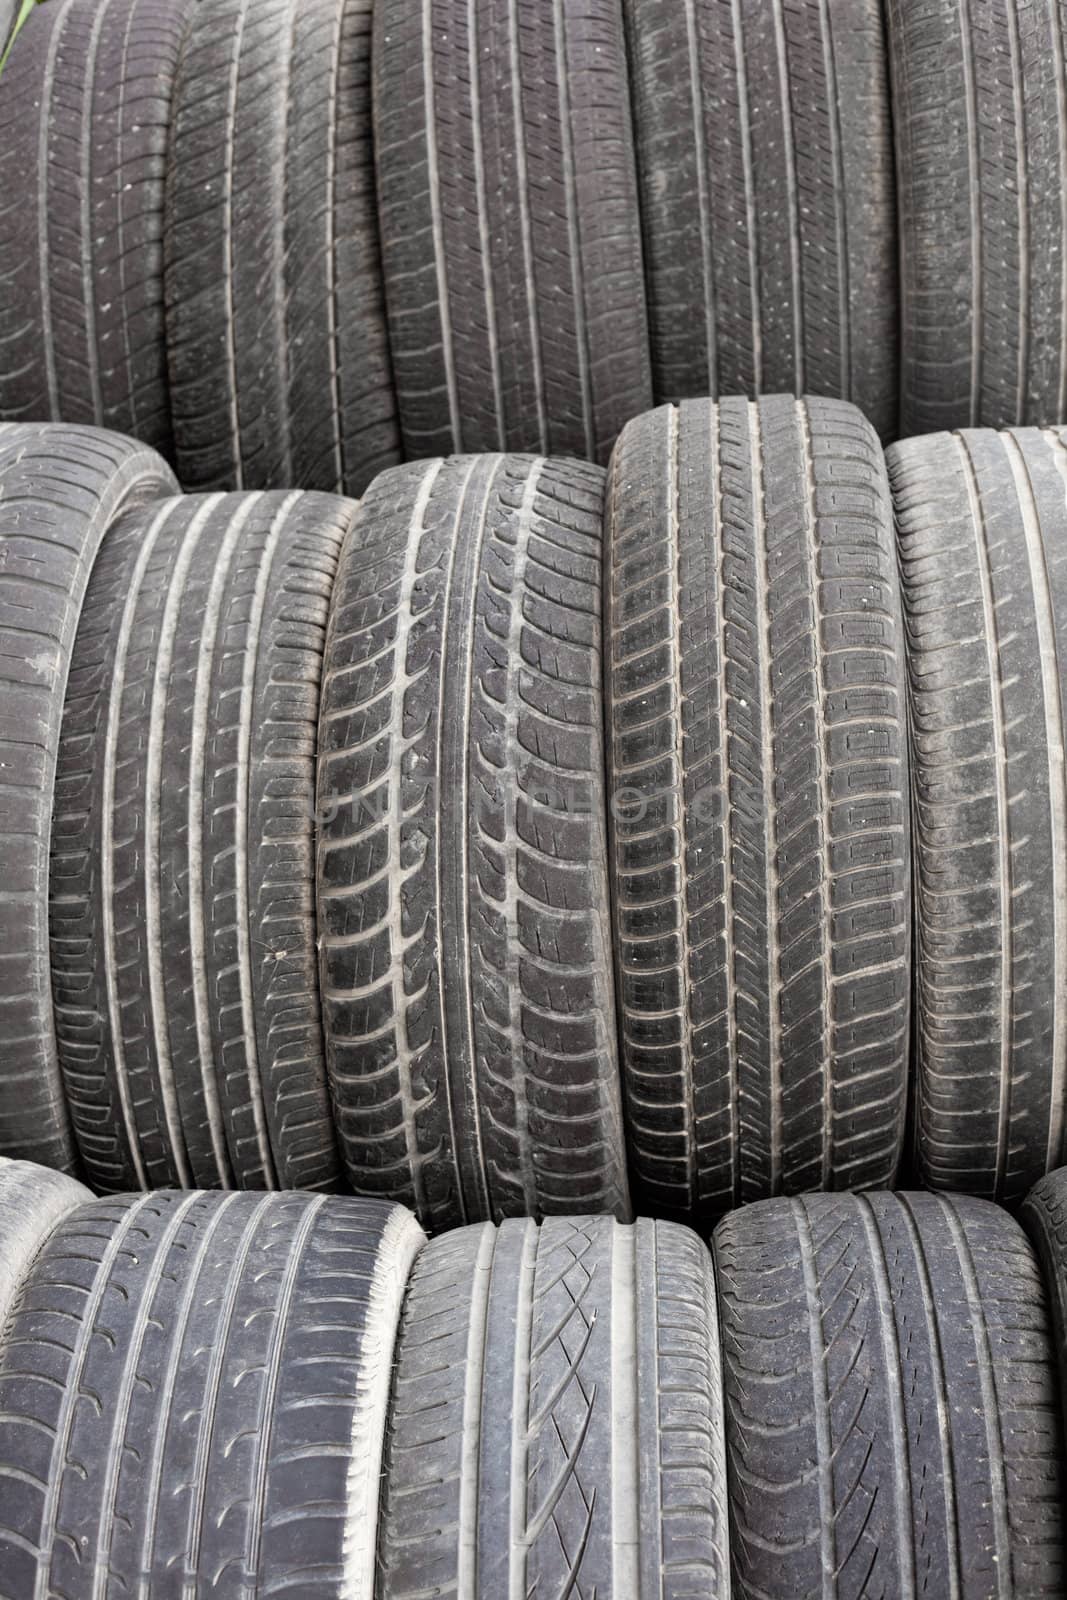 Background texture pattern of old tires for rubber recycling.